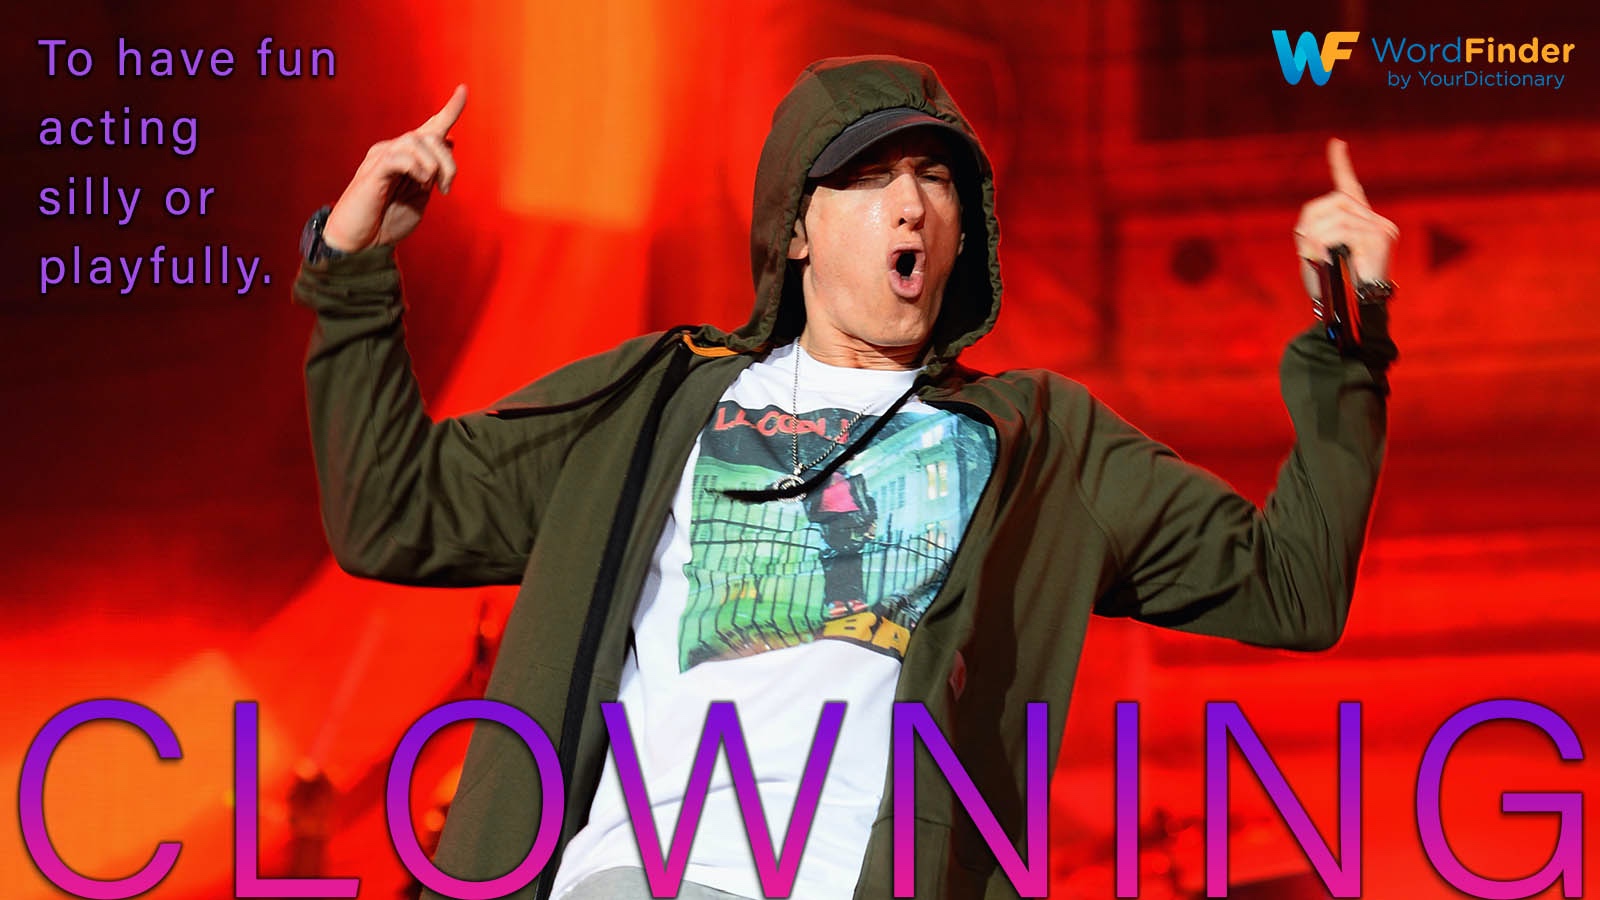 definition clowning with Image of eminem